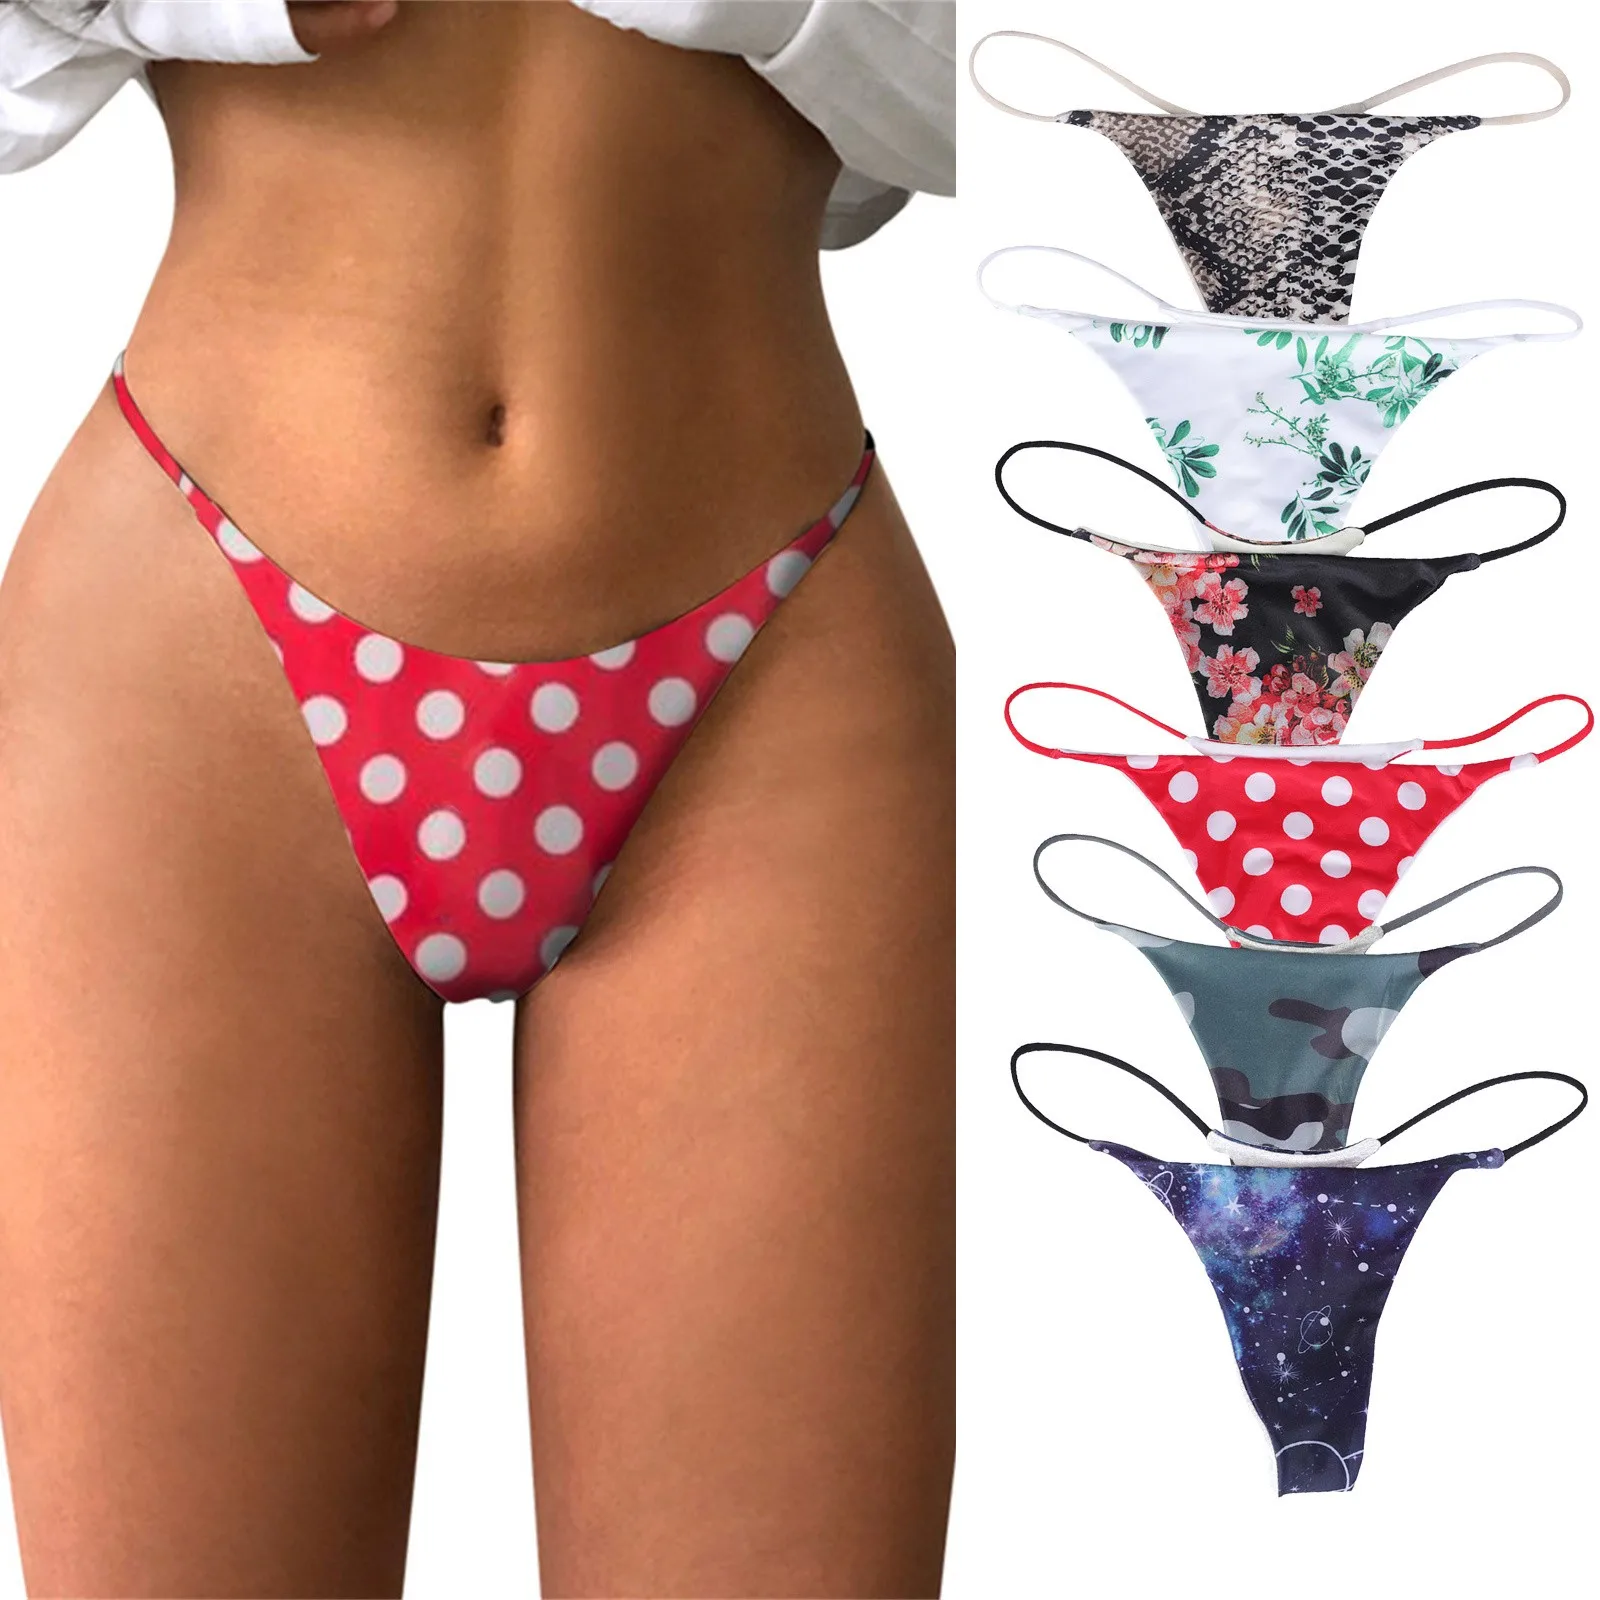 

Sexy Low-Rise Panties Women's Underwear Polka Dot Print Sexy Thongs G string Femme Lingerie Comfy Soft Underpants T-Back Panties